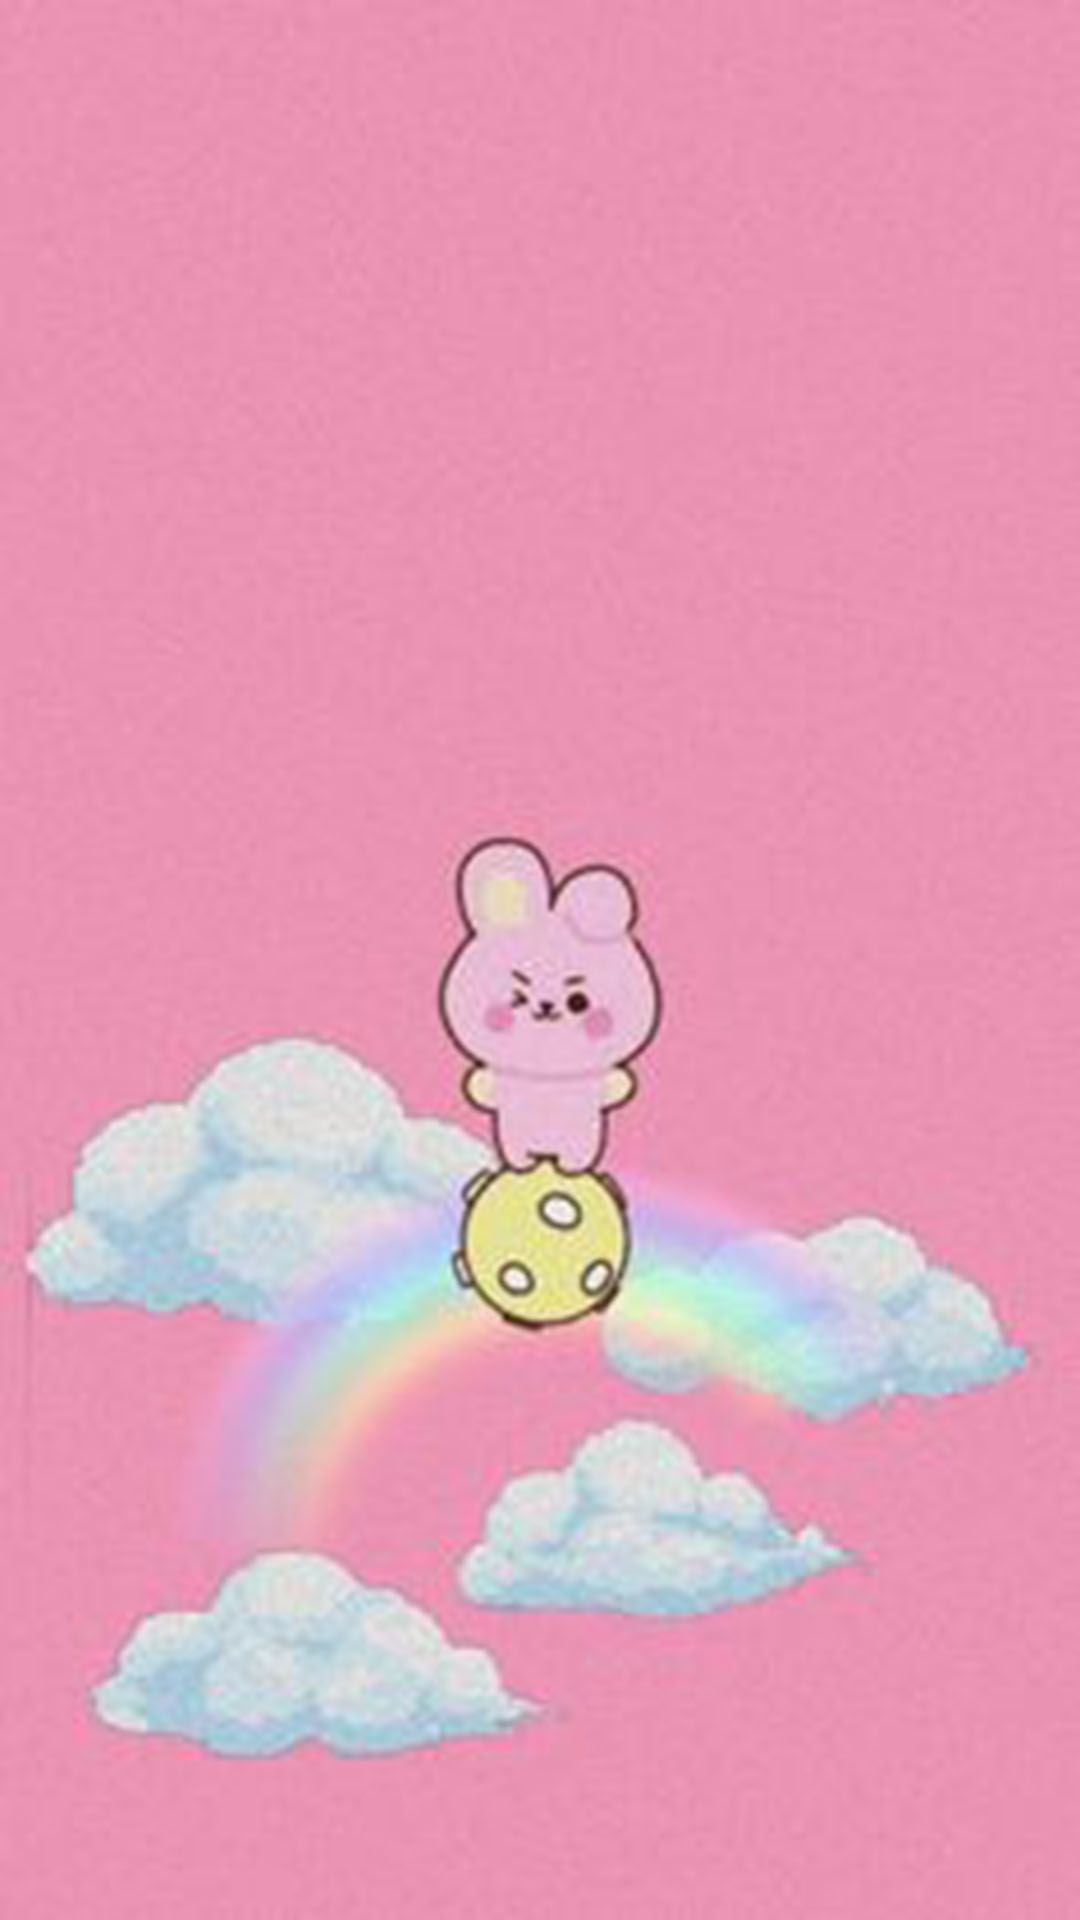 wallpaper 3 bt21 : Free Download, Borrow, and Streaming : Internet Archive